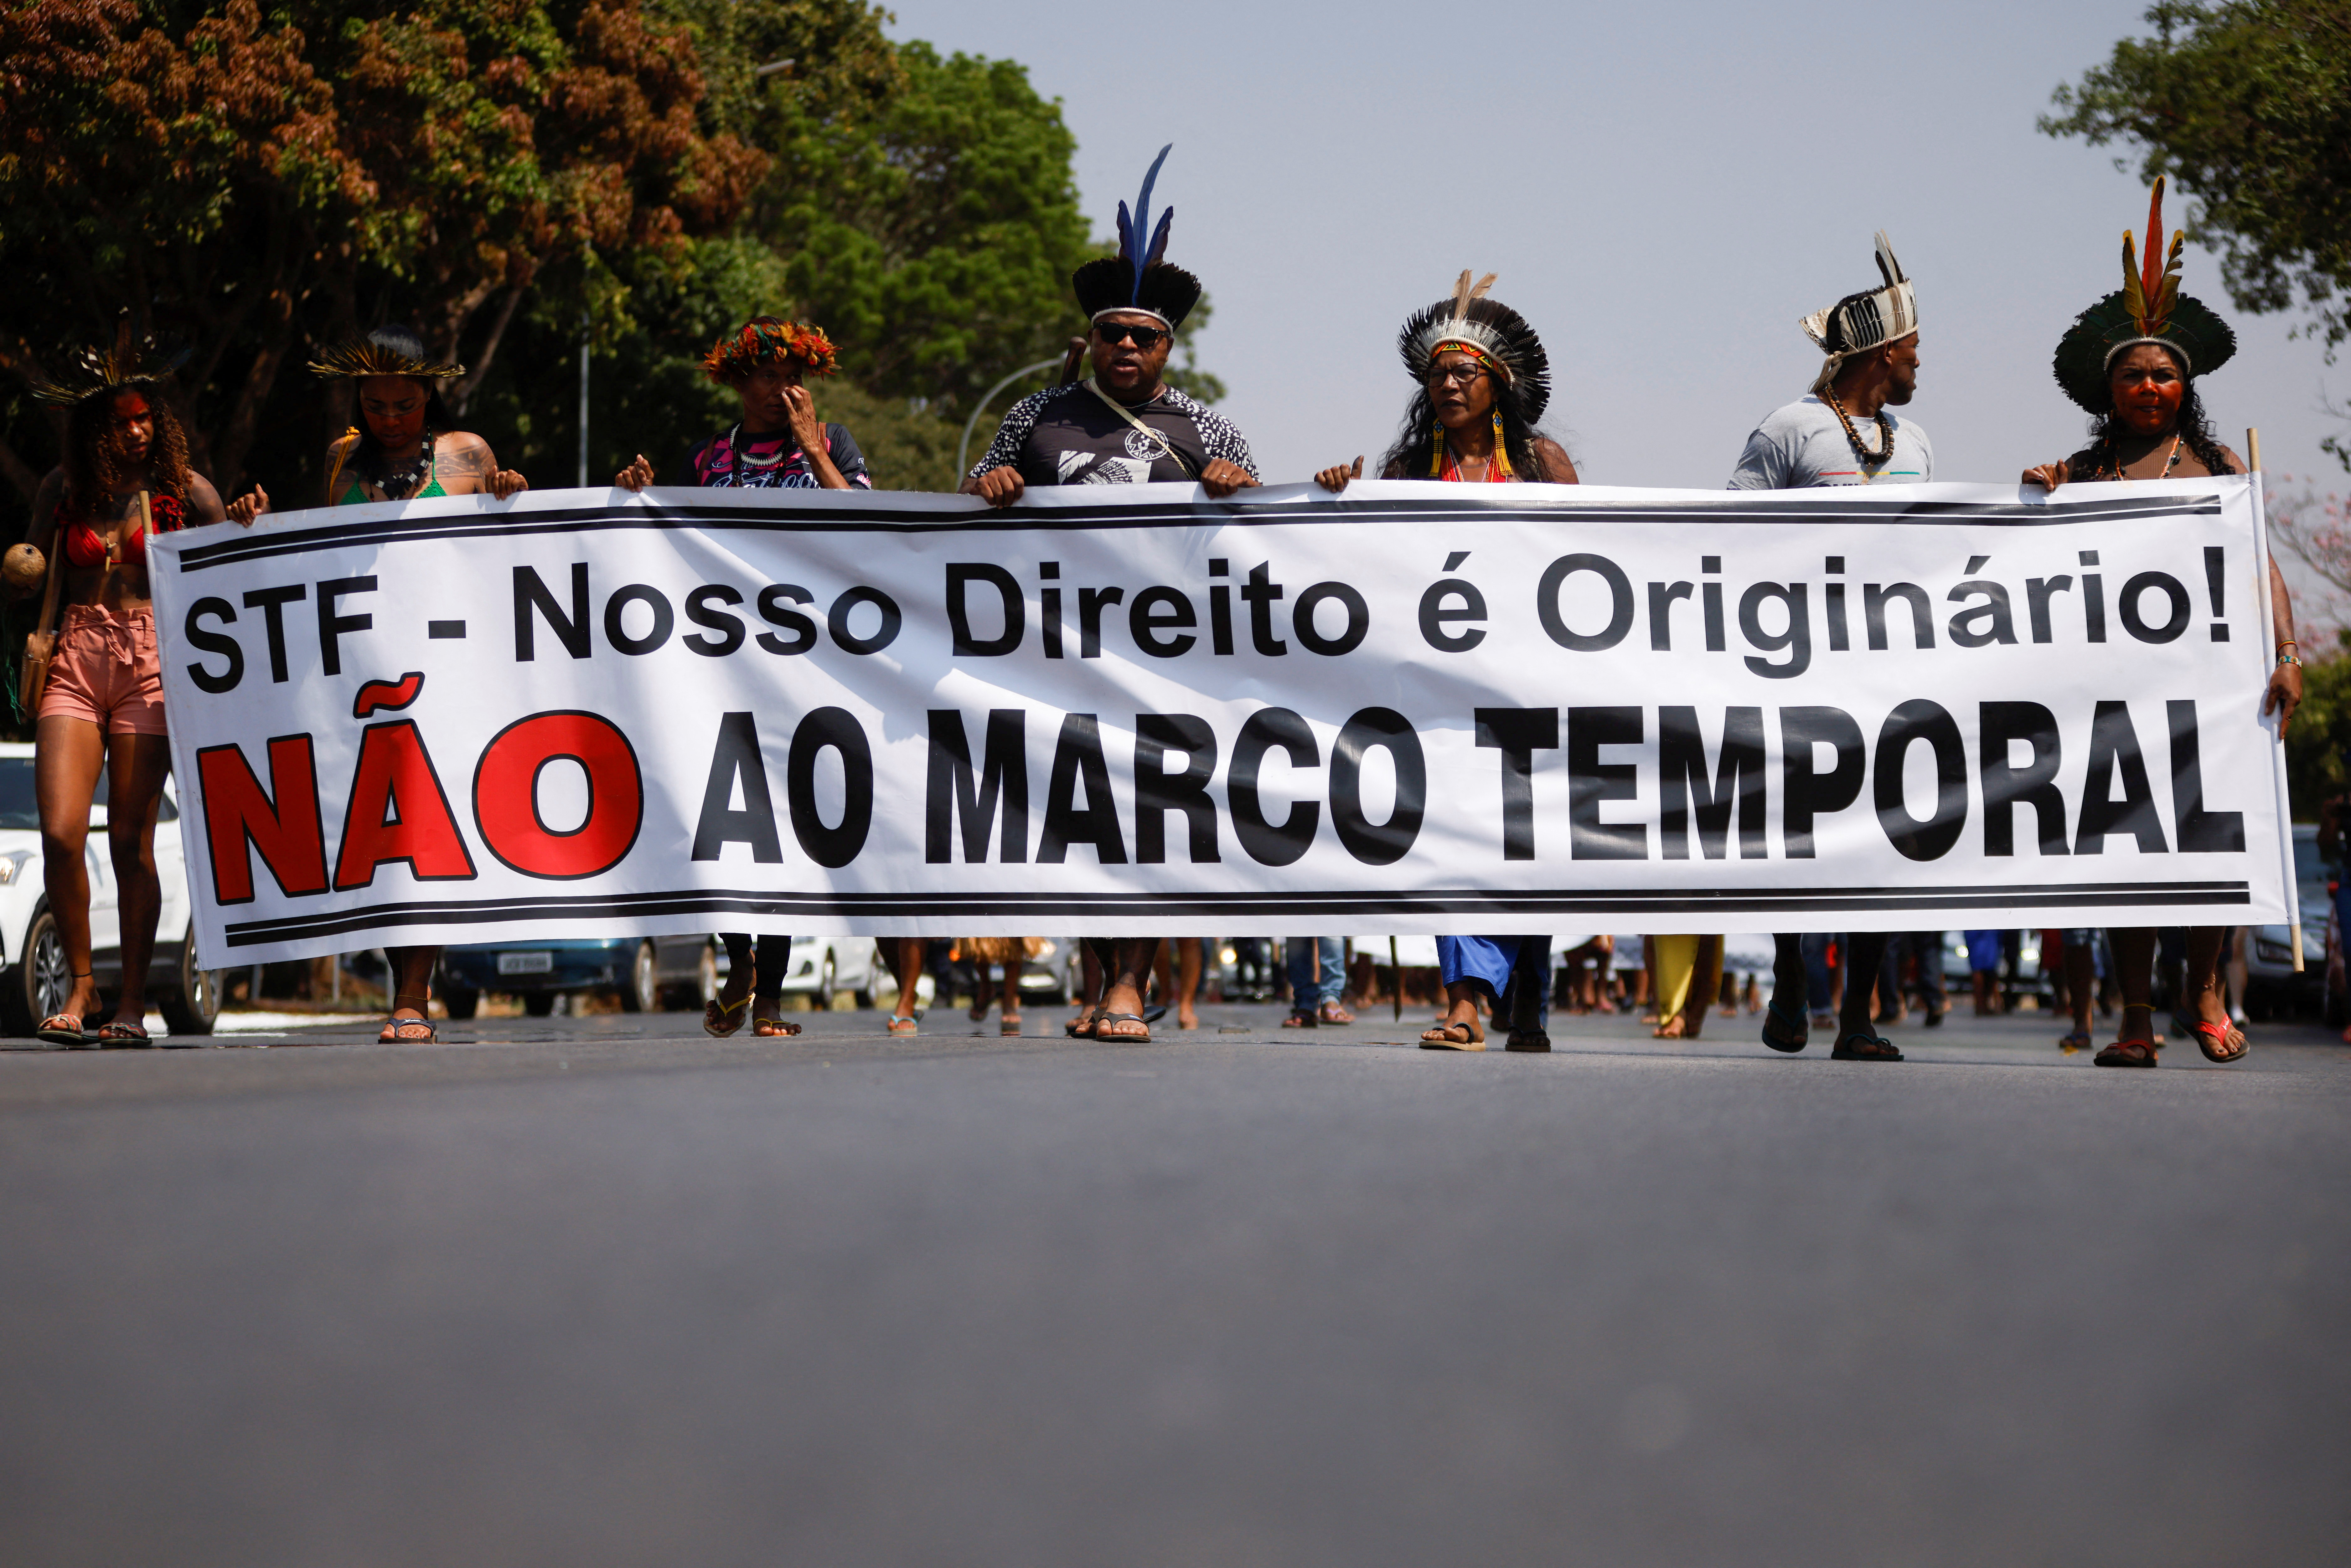 A protest in Brasilia, Brazil, against violence suffered by Pataxo Indigenous people